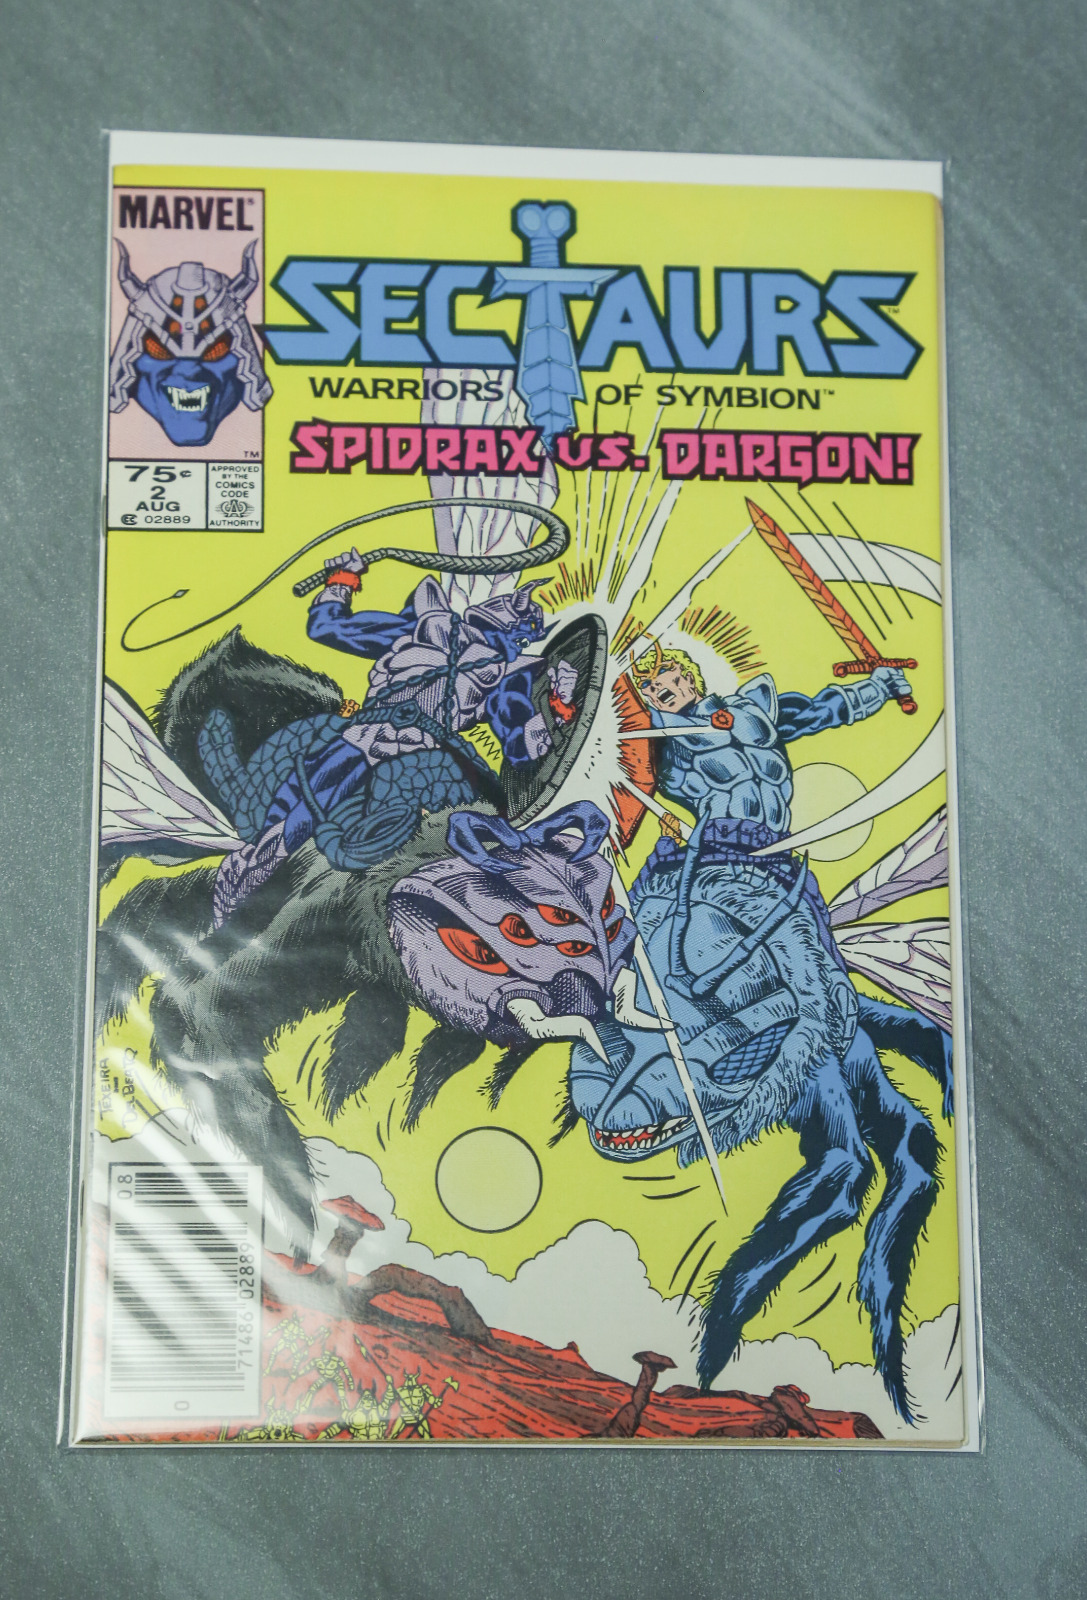 Sectaurs #2 1985 Marvel Comics Newstand  Copper Age comic book